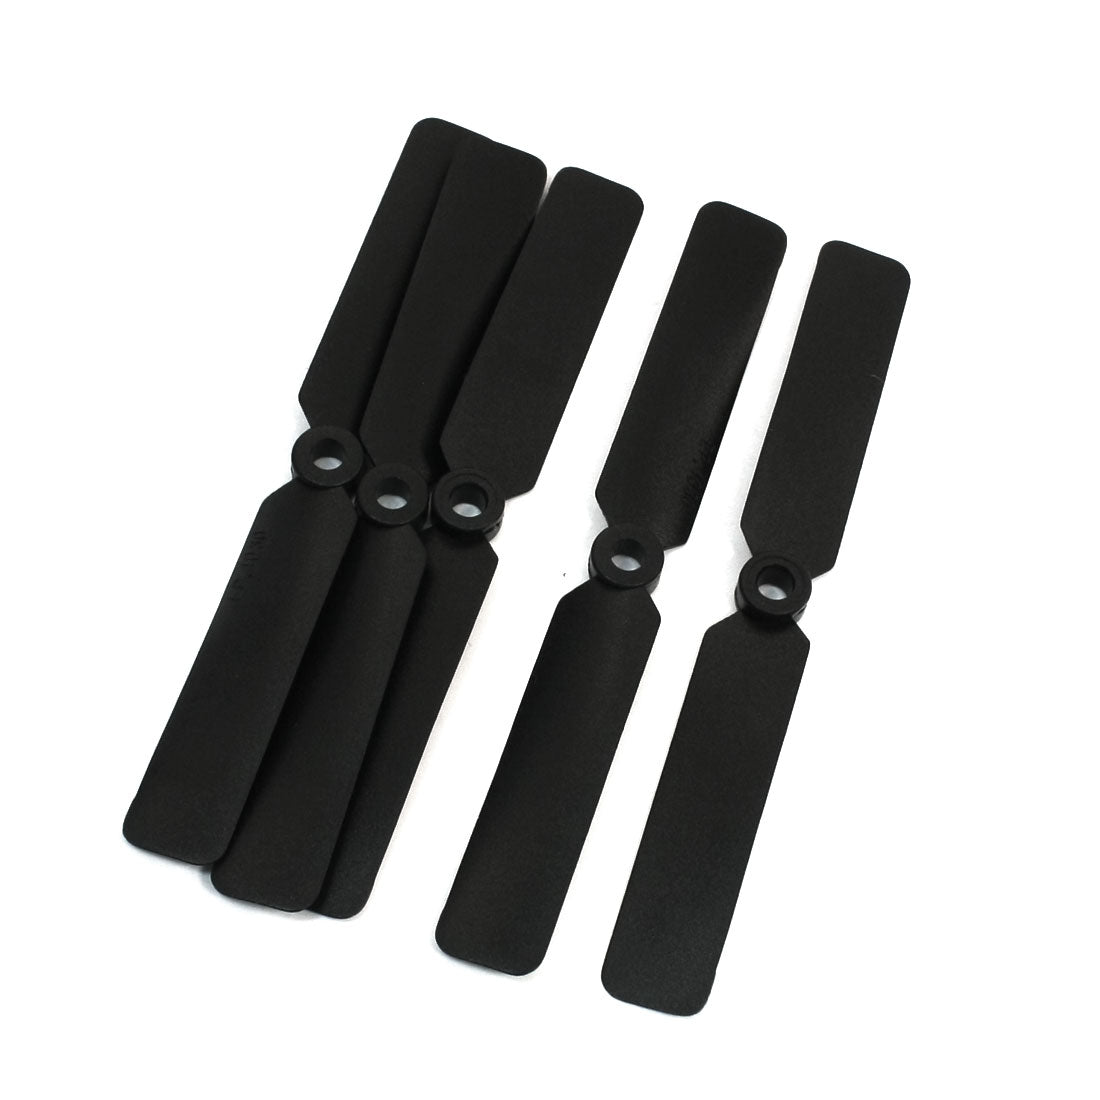 uxcell Uxcell 5pcs EP 4030 4x3 4.8mm Hub Thickness Plastic Propellers for Slowflyer